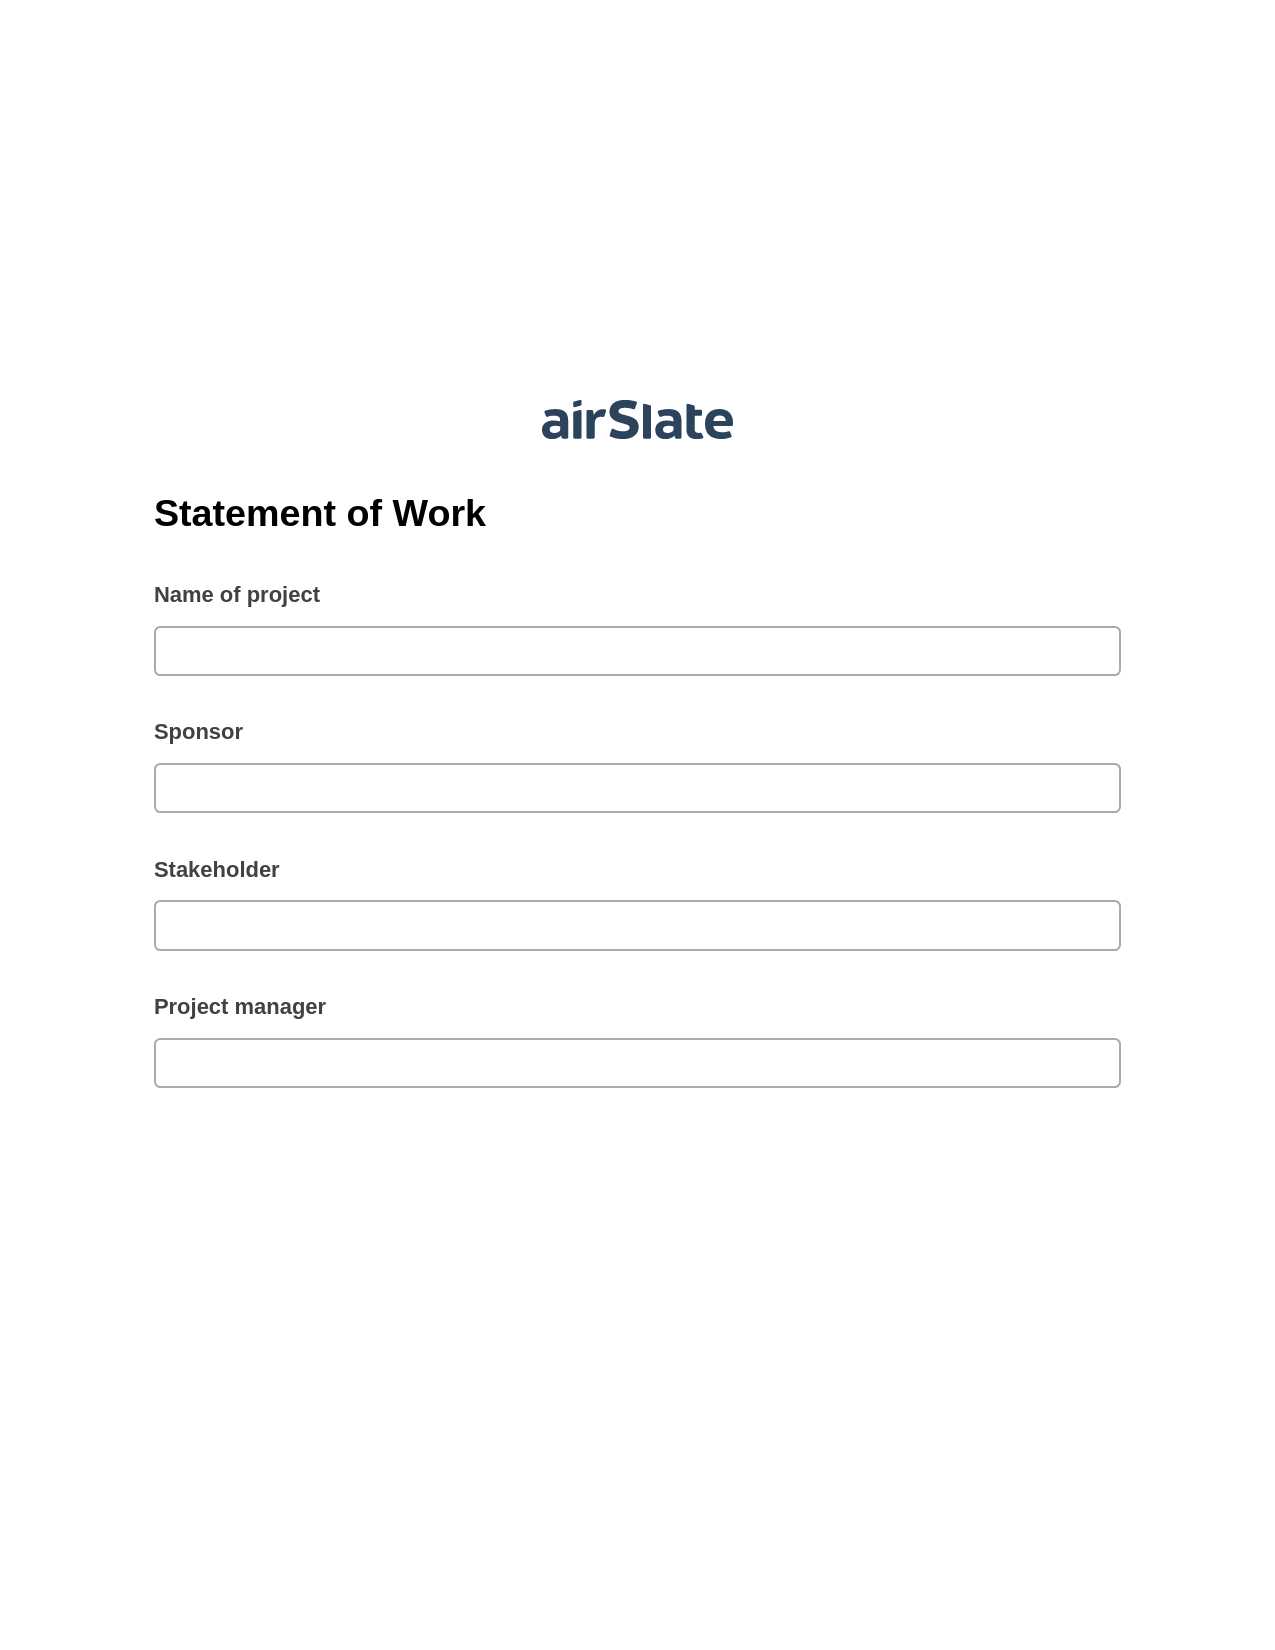 Statement of Work Pre-fill from another Slate Bot, Assign Slate Name Bot, Google Drive Bot